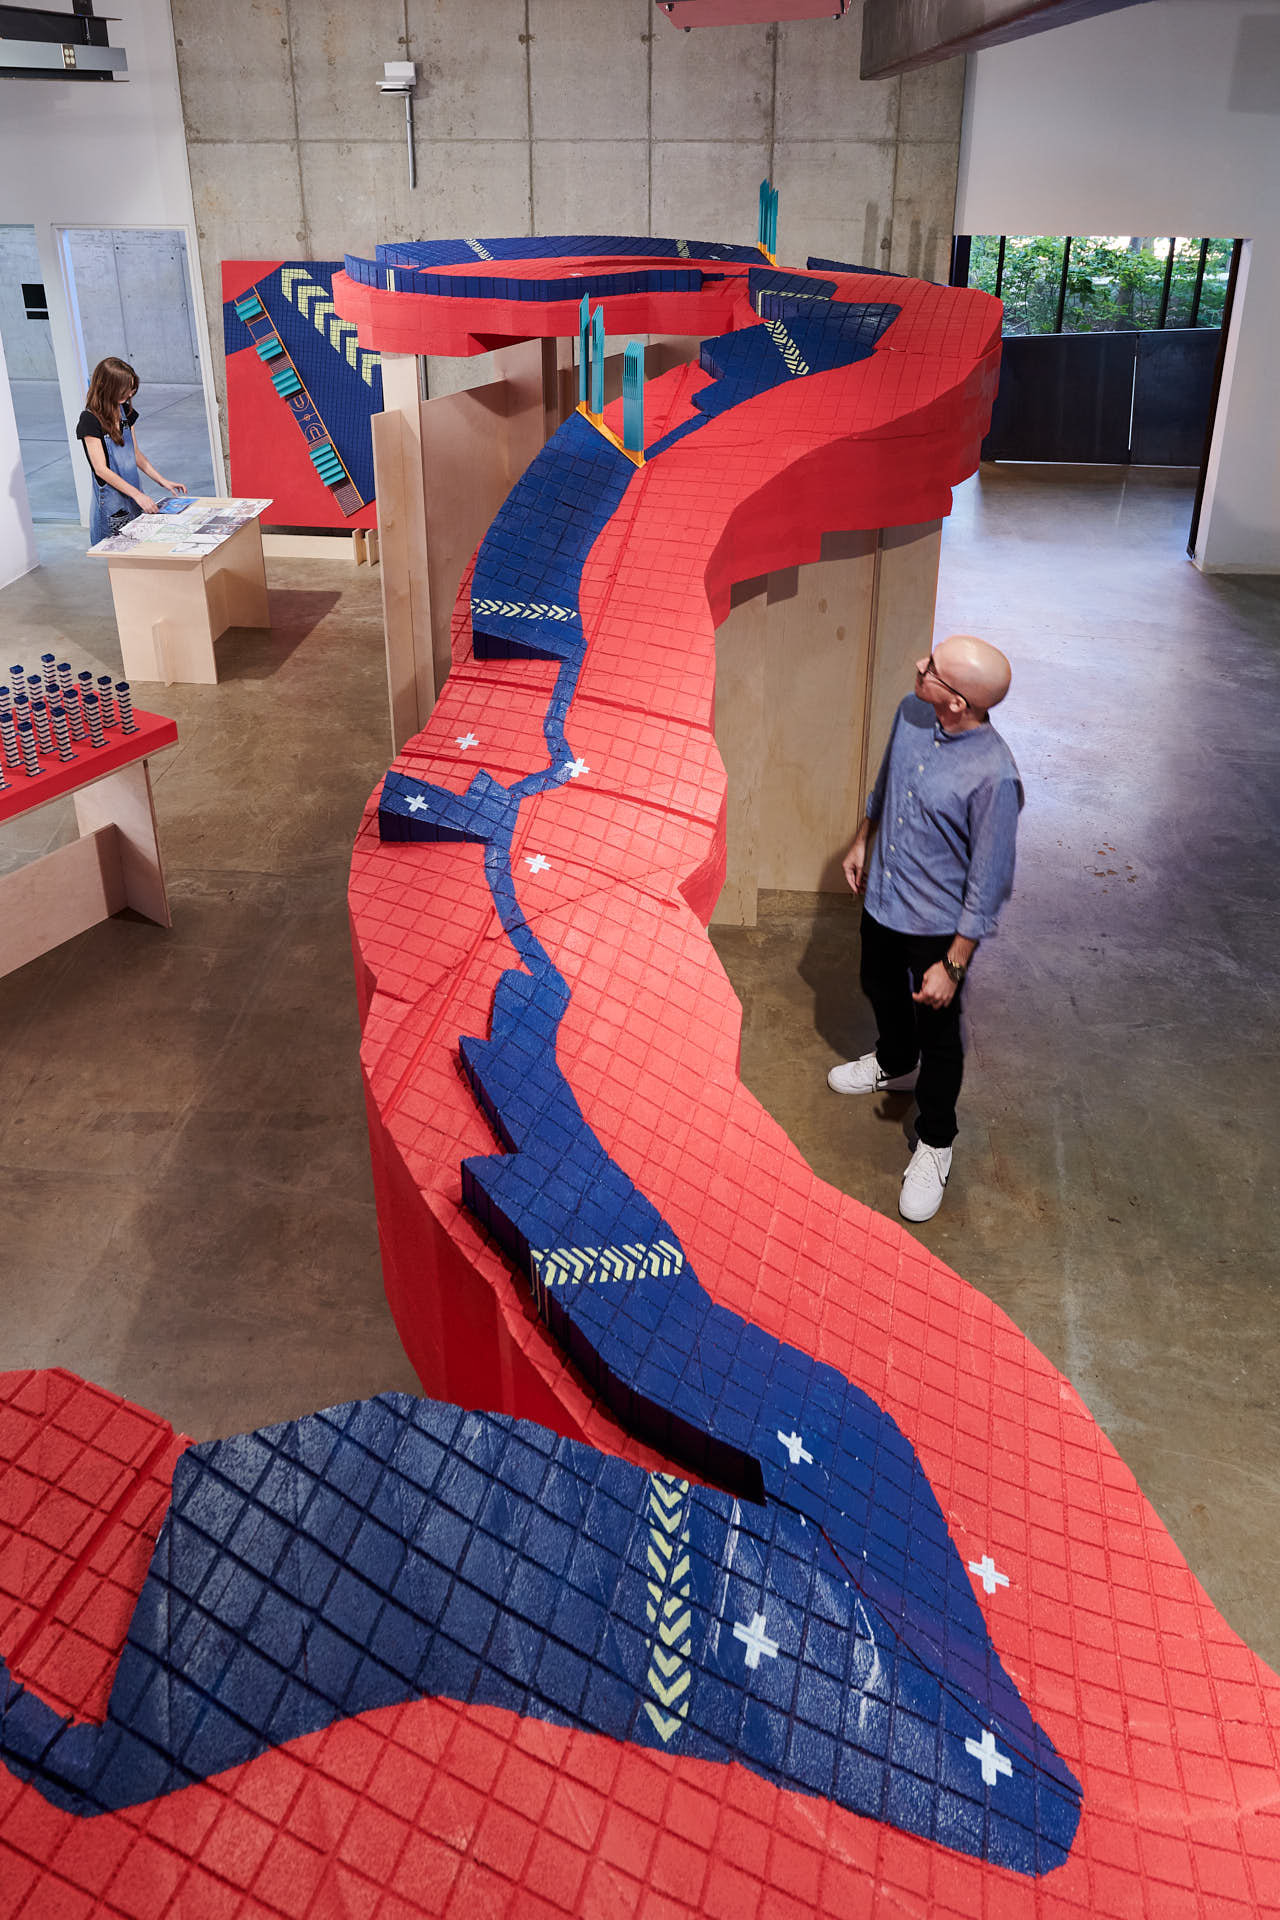 A long red and blue river installation with a man next to it